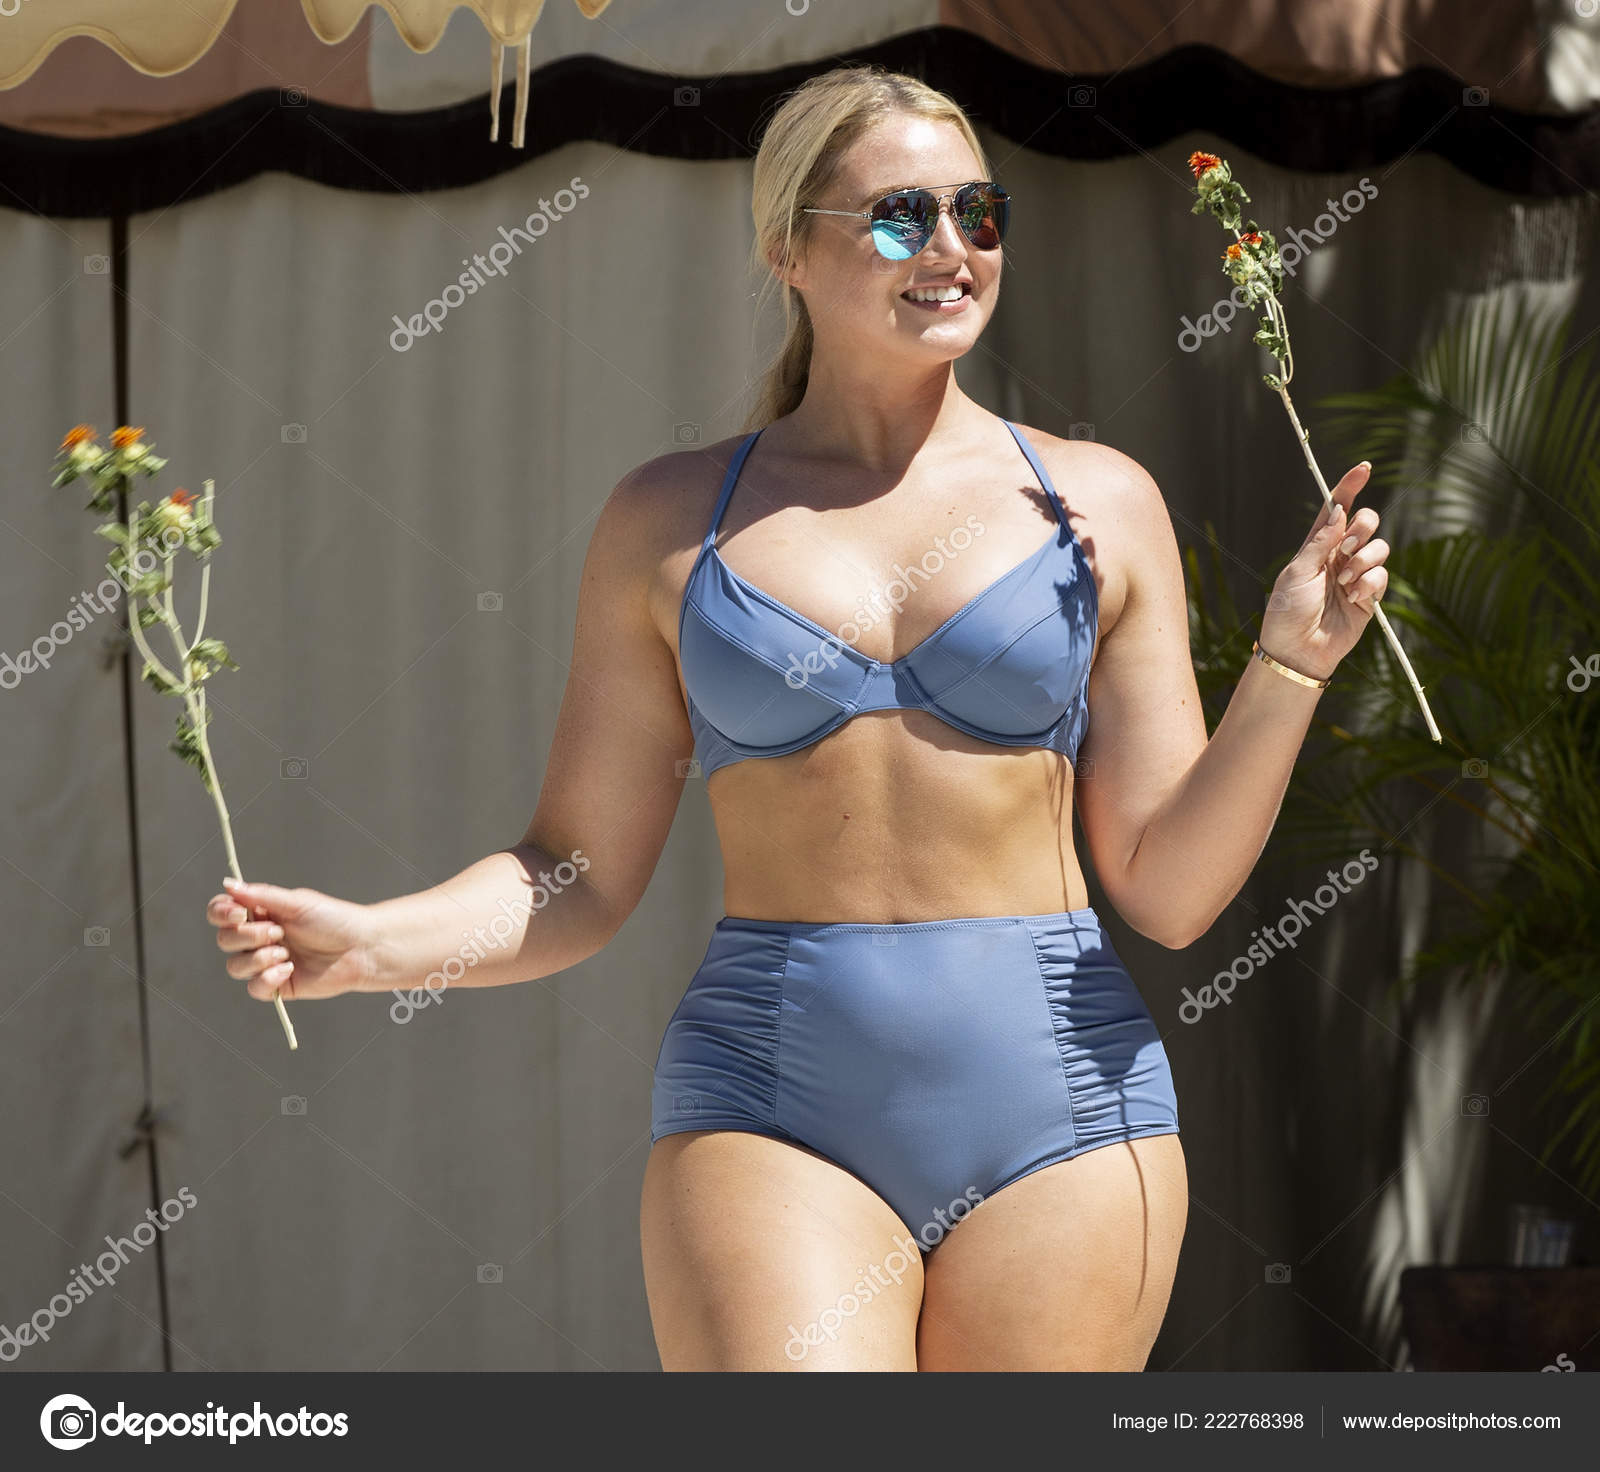 Images Of Iskra Lawrence photo 18